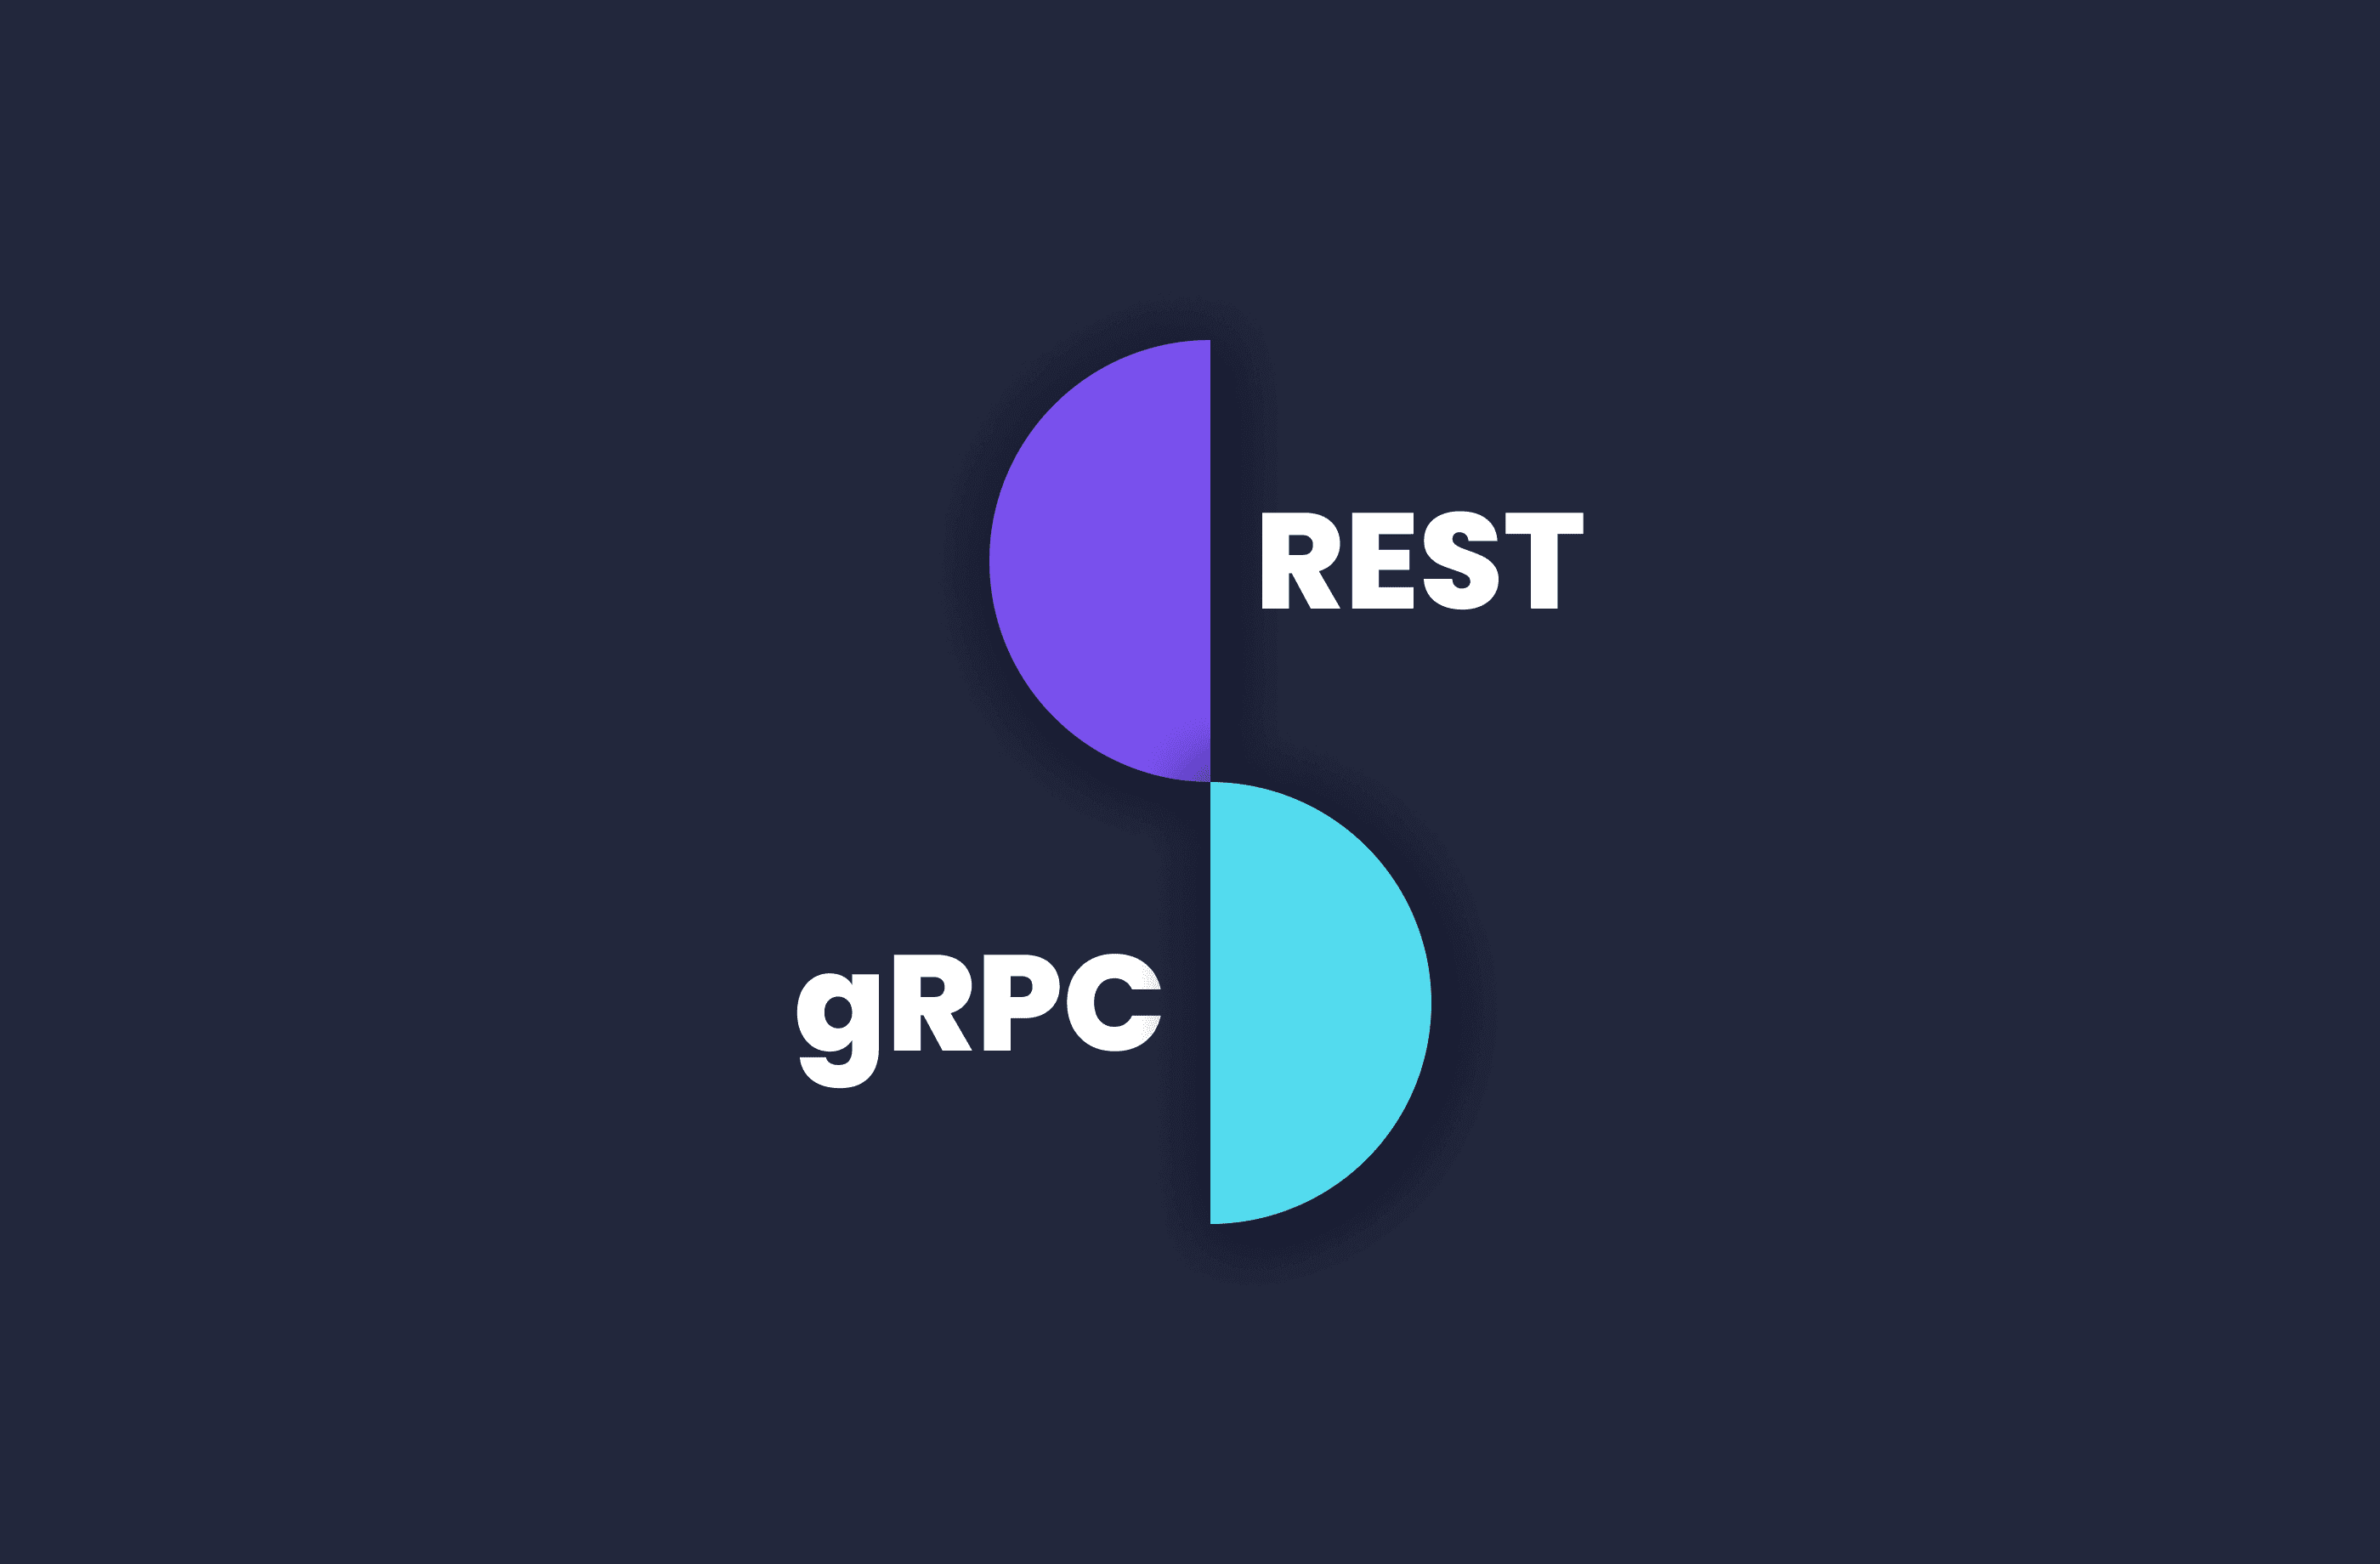 REST vs. gRPC - What’s the Difference?